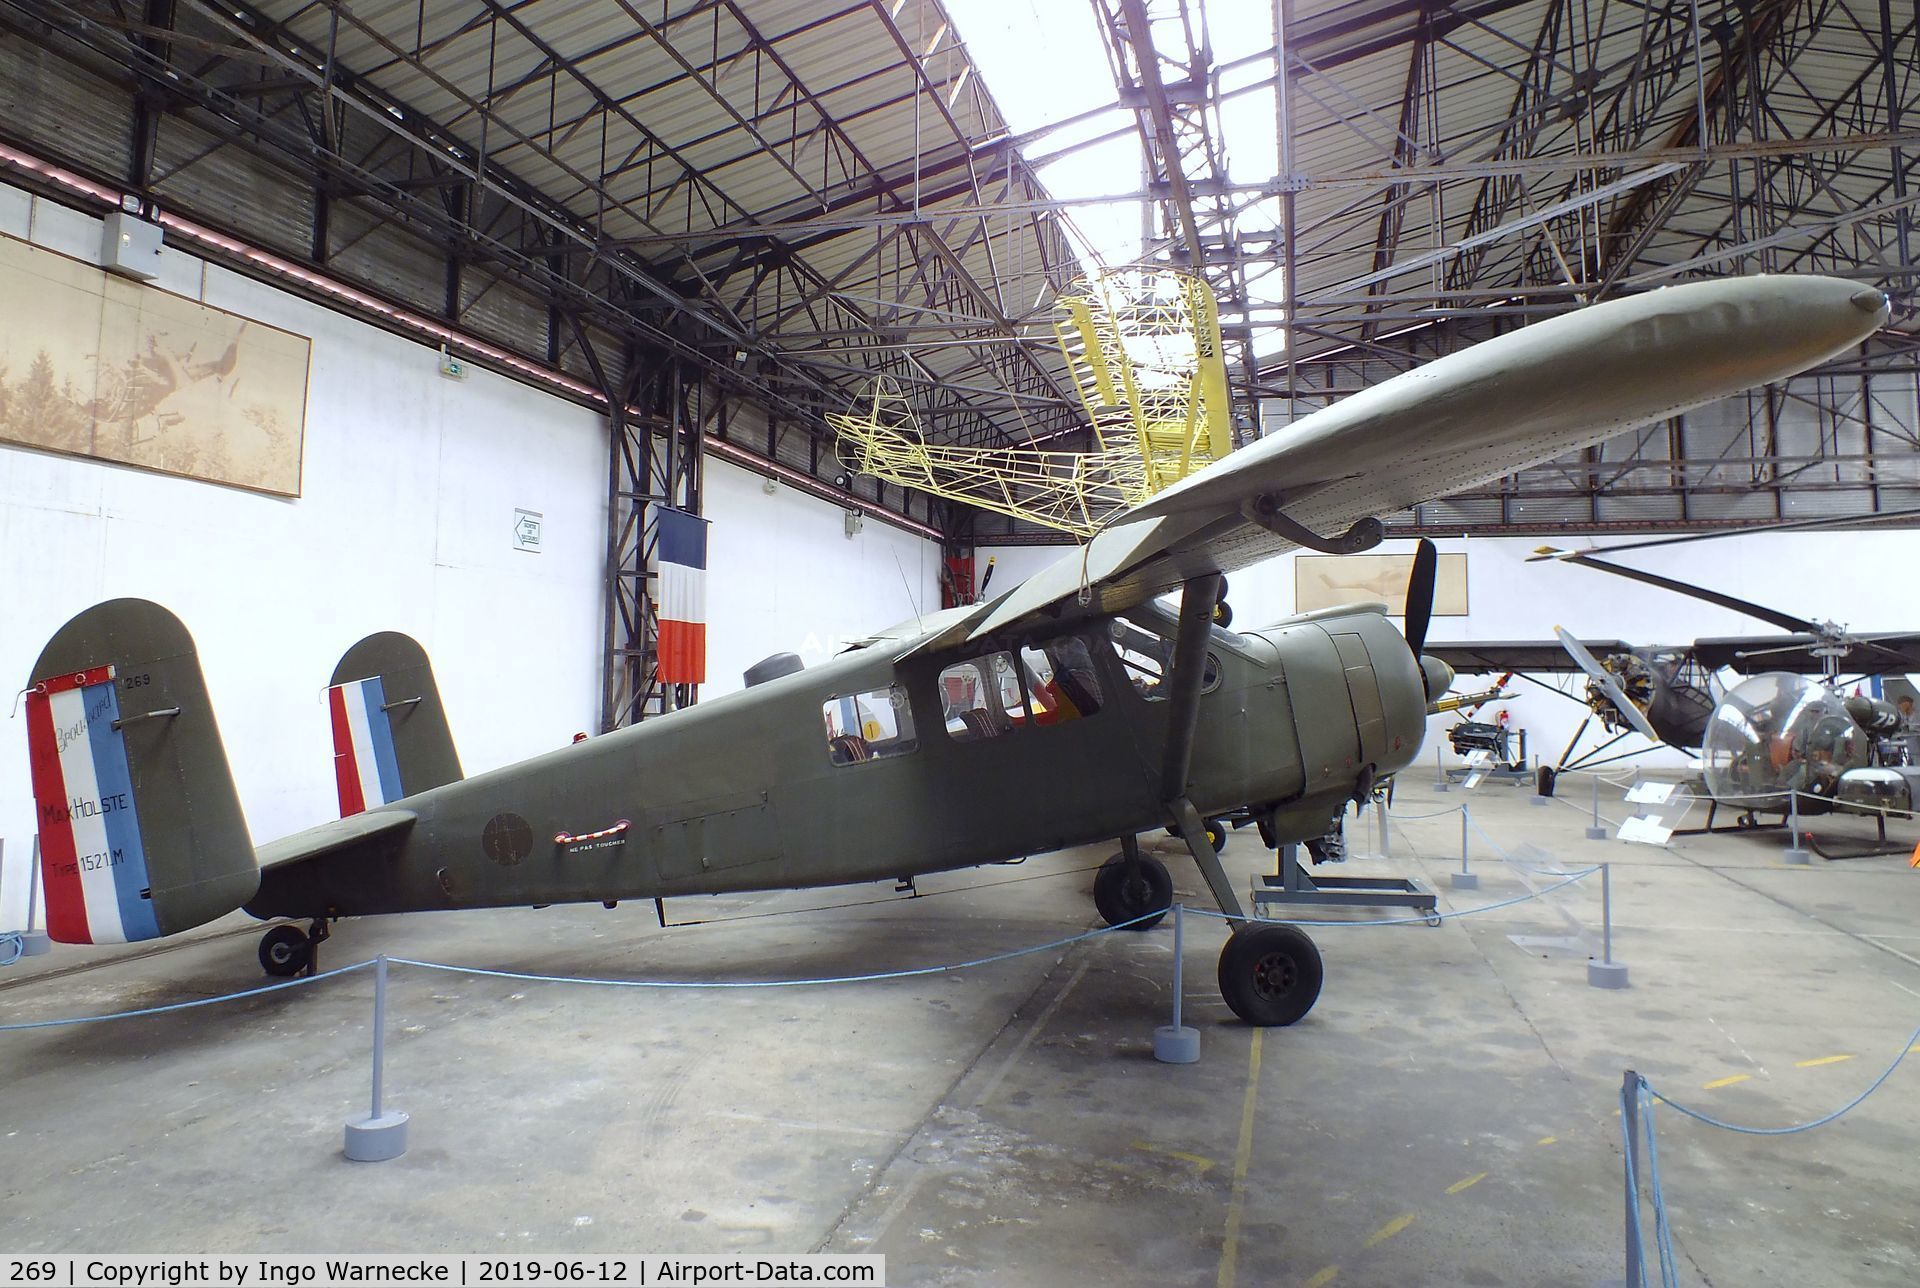 269, Max Holste MH.1521M Broussard C/N 269, Max Holste MH.1521M Broussard at the Musee de l'ALAT et de l'Helicoptere, Dax